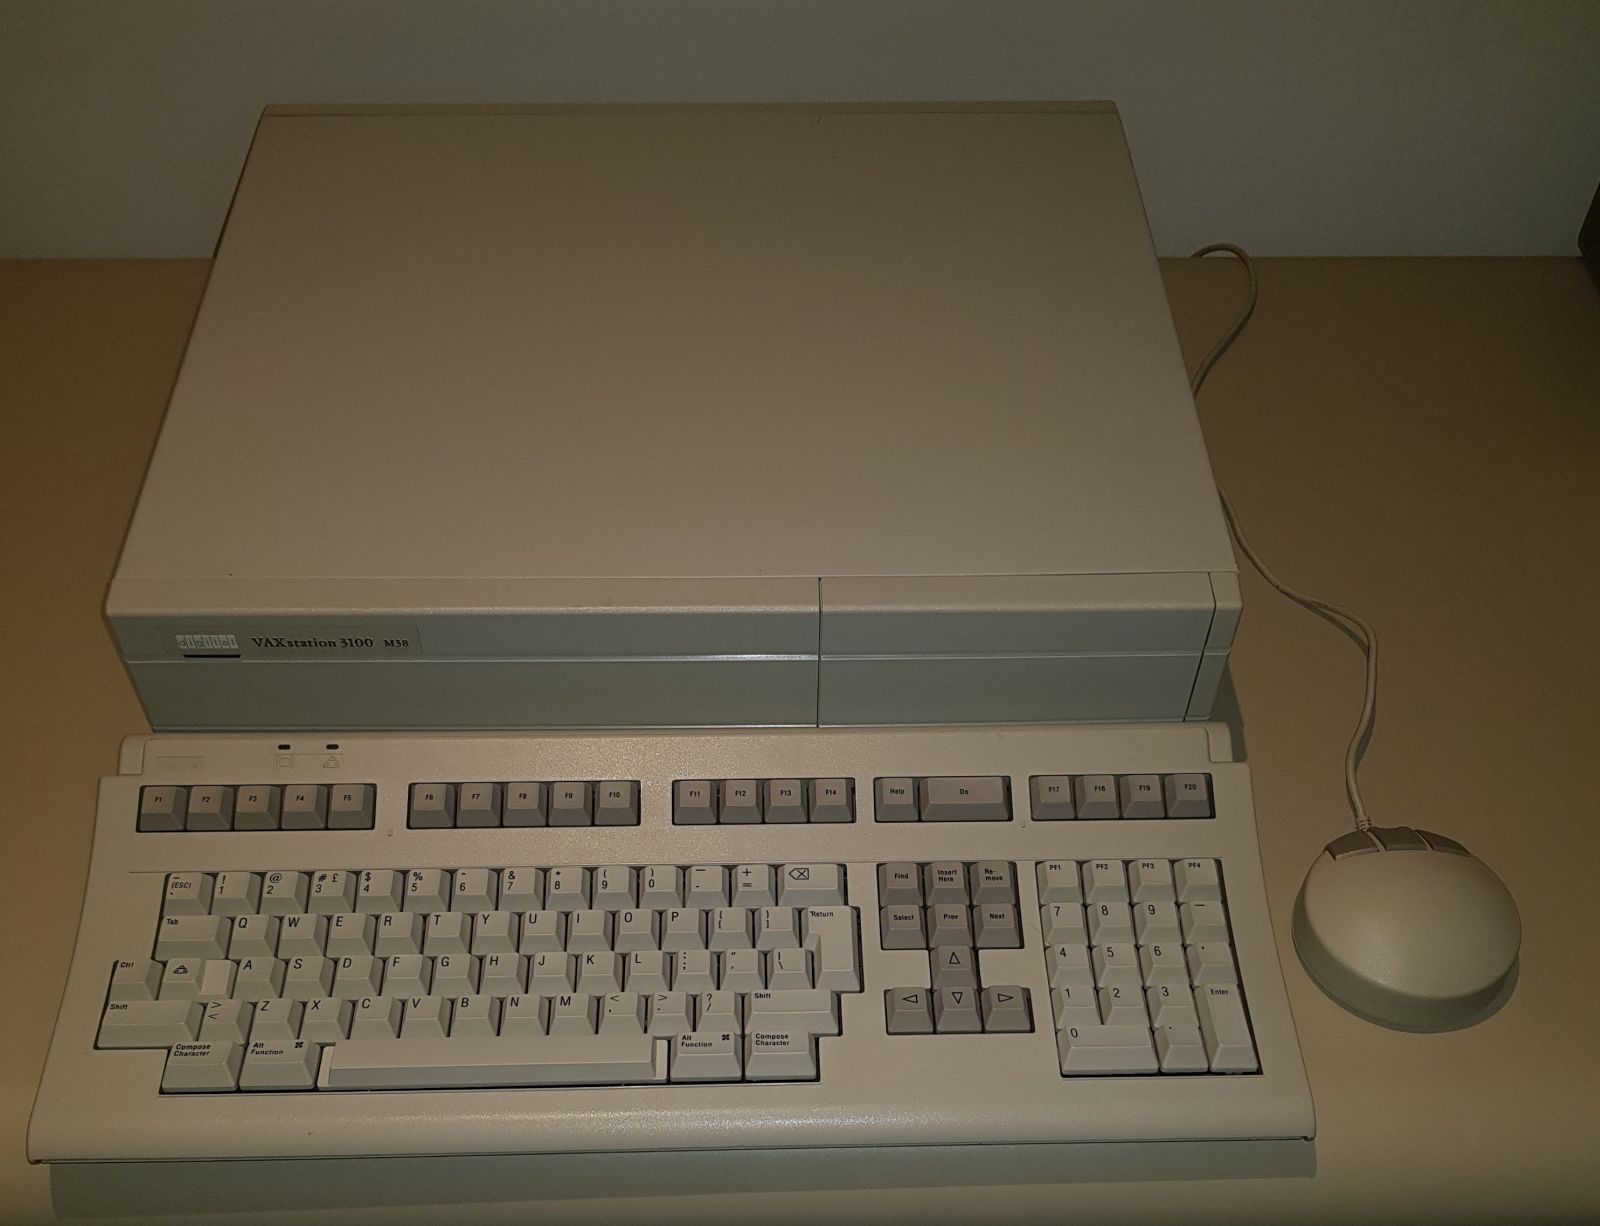 DEC MicroVAX 3100 M38 with 16Mb Memory, Keyboard and Mouse